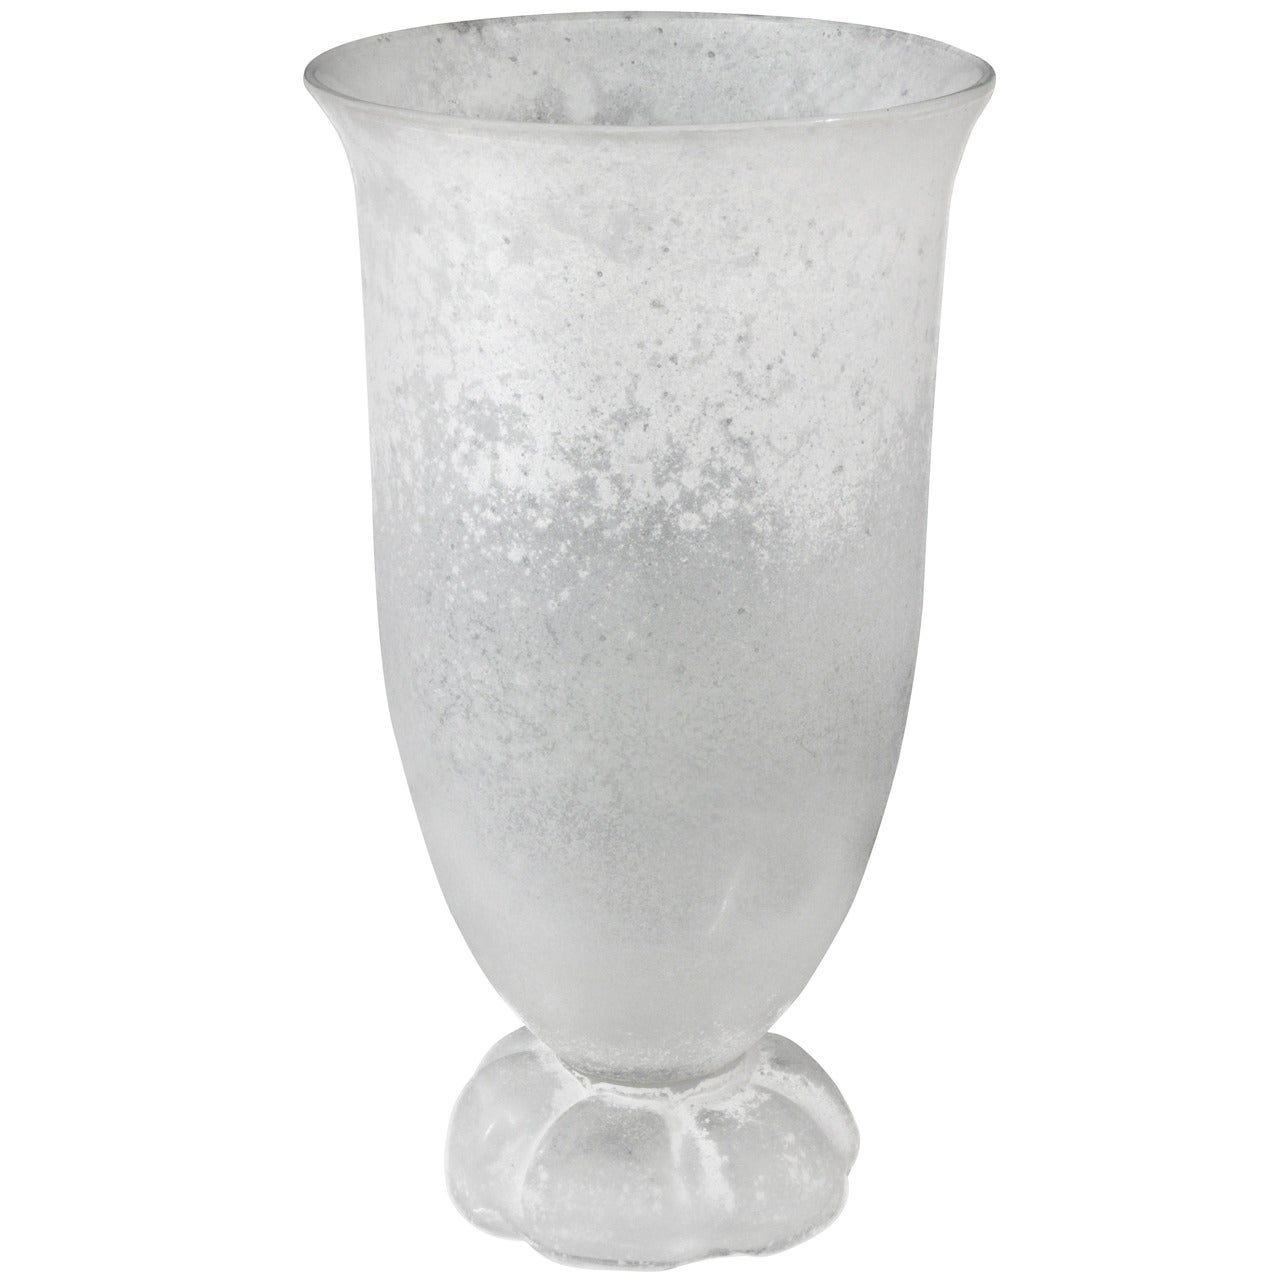 Large Handblown White Glass Urn or Vase with Scavo Finish by Karl Springer